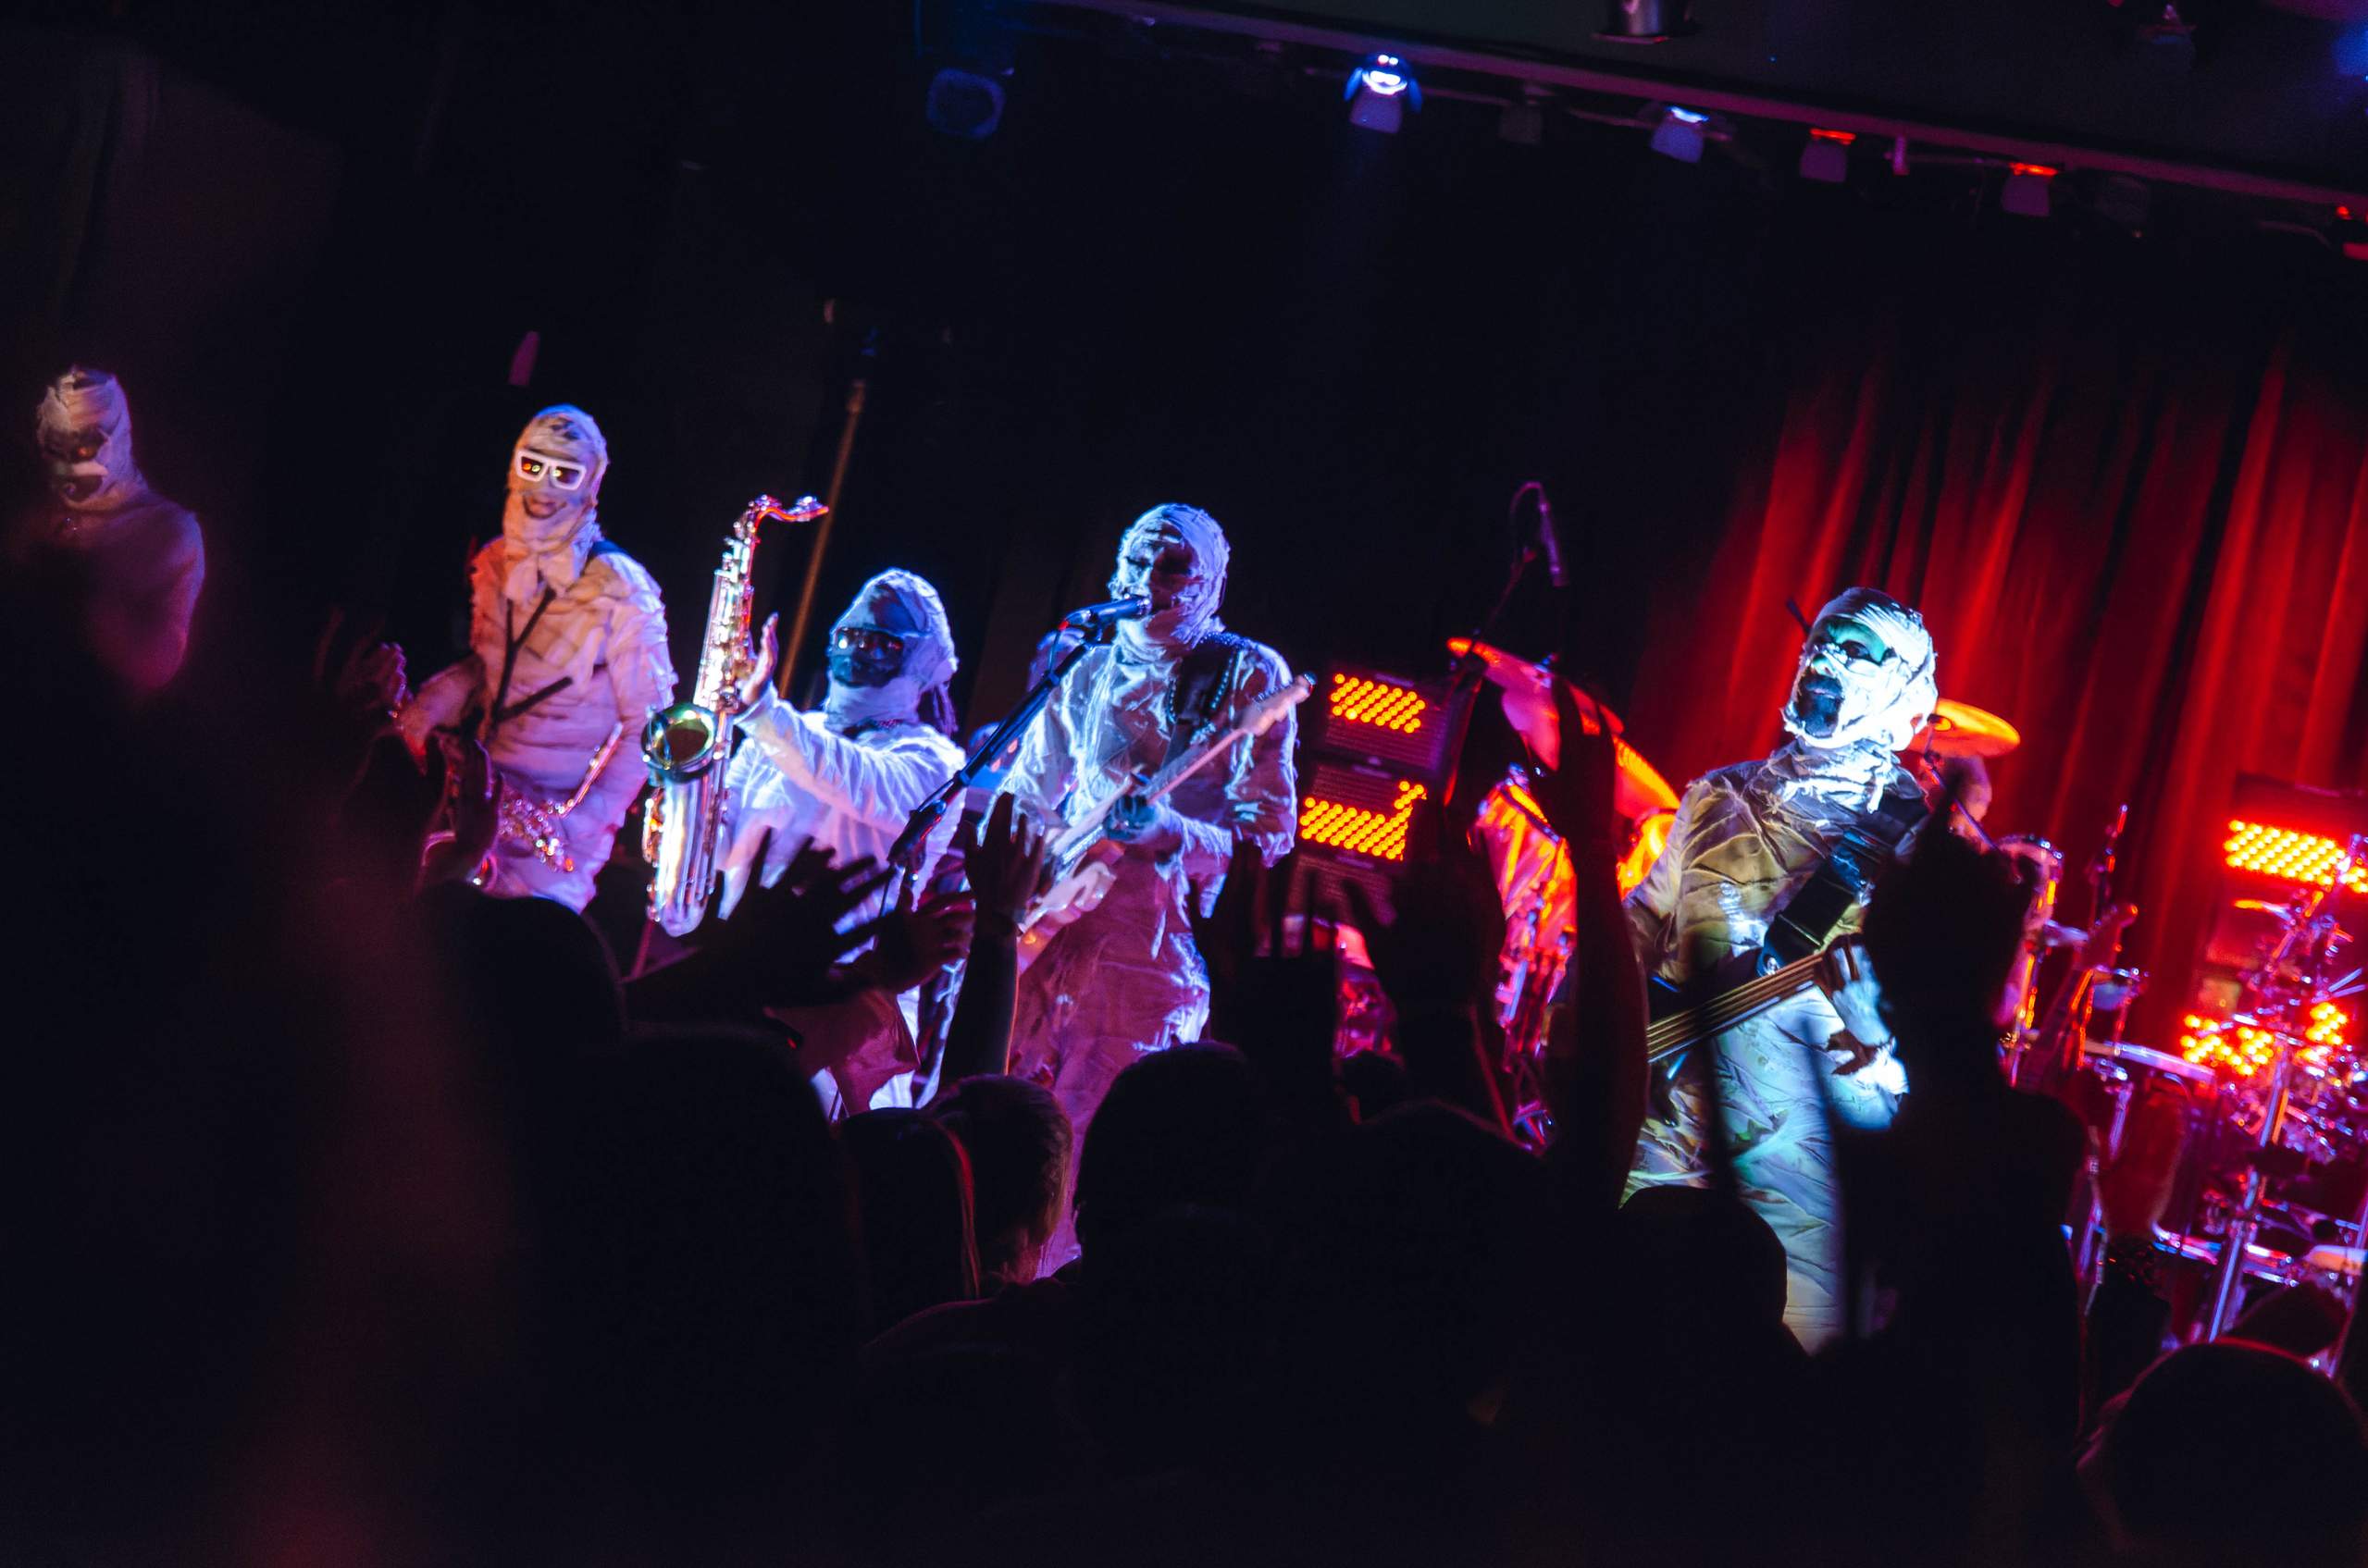 Here Come the mummies performing at The Majestic in Madison, WI October 19, 2013, photography by Ross Harried for Second Crop Music